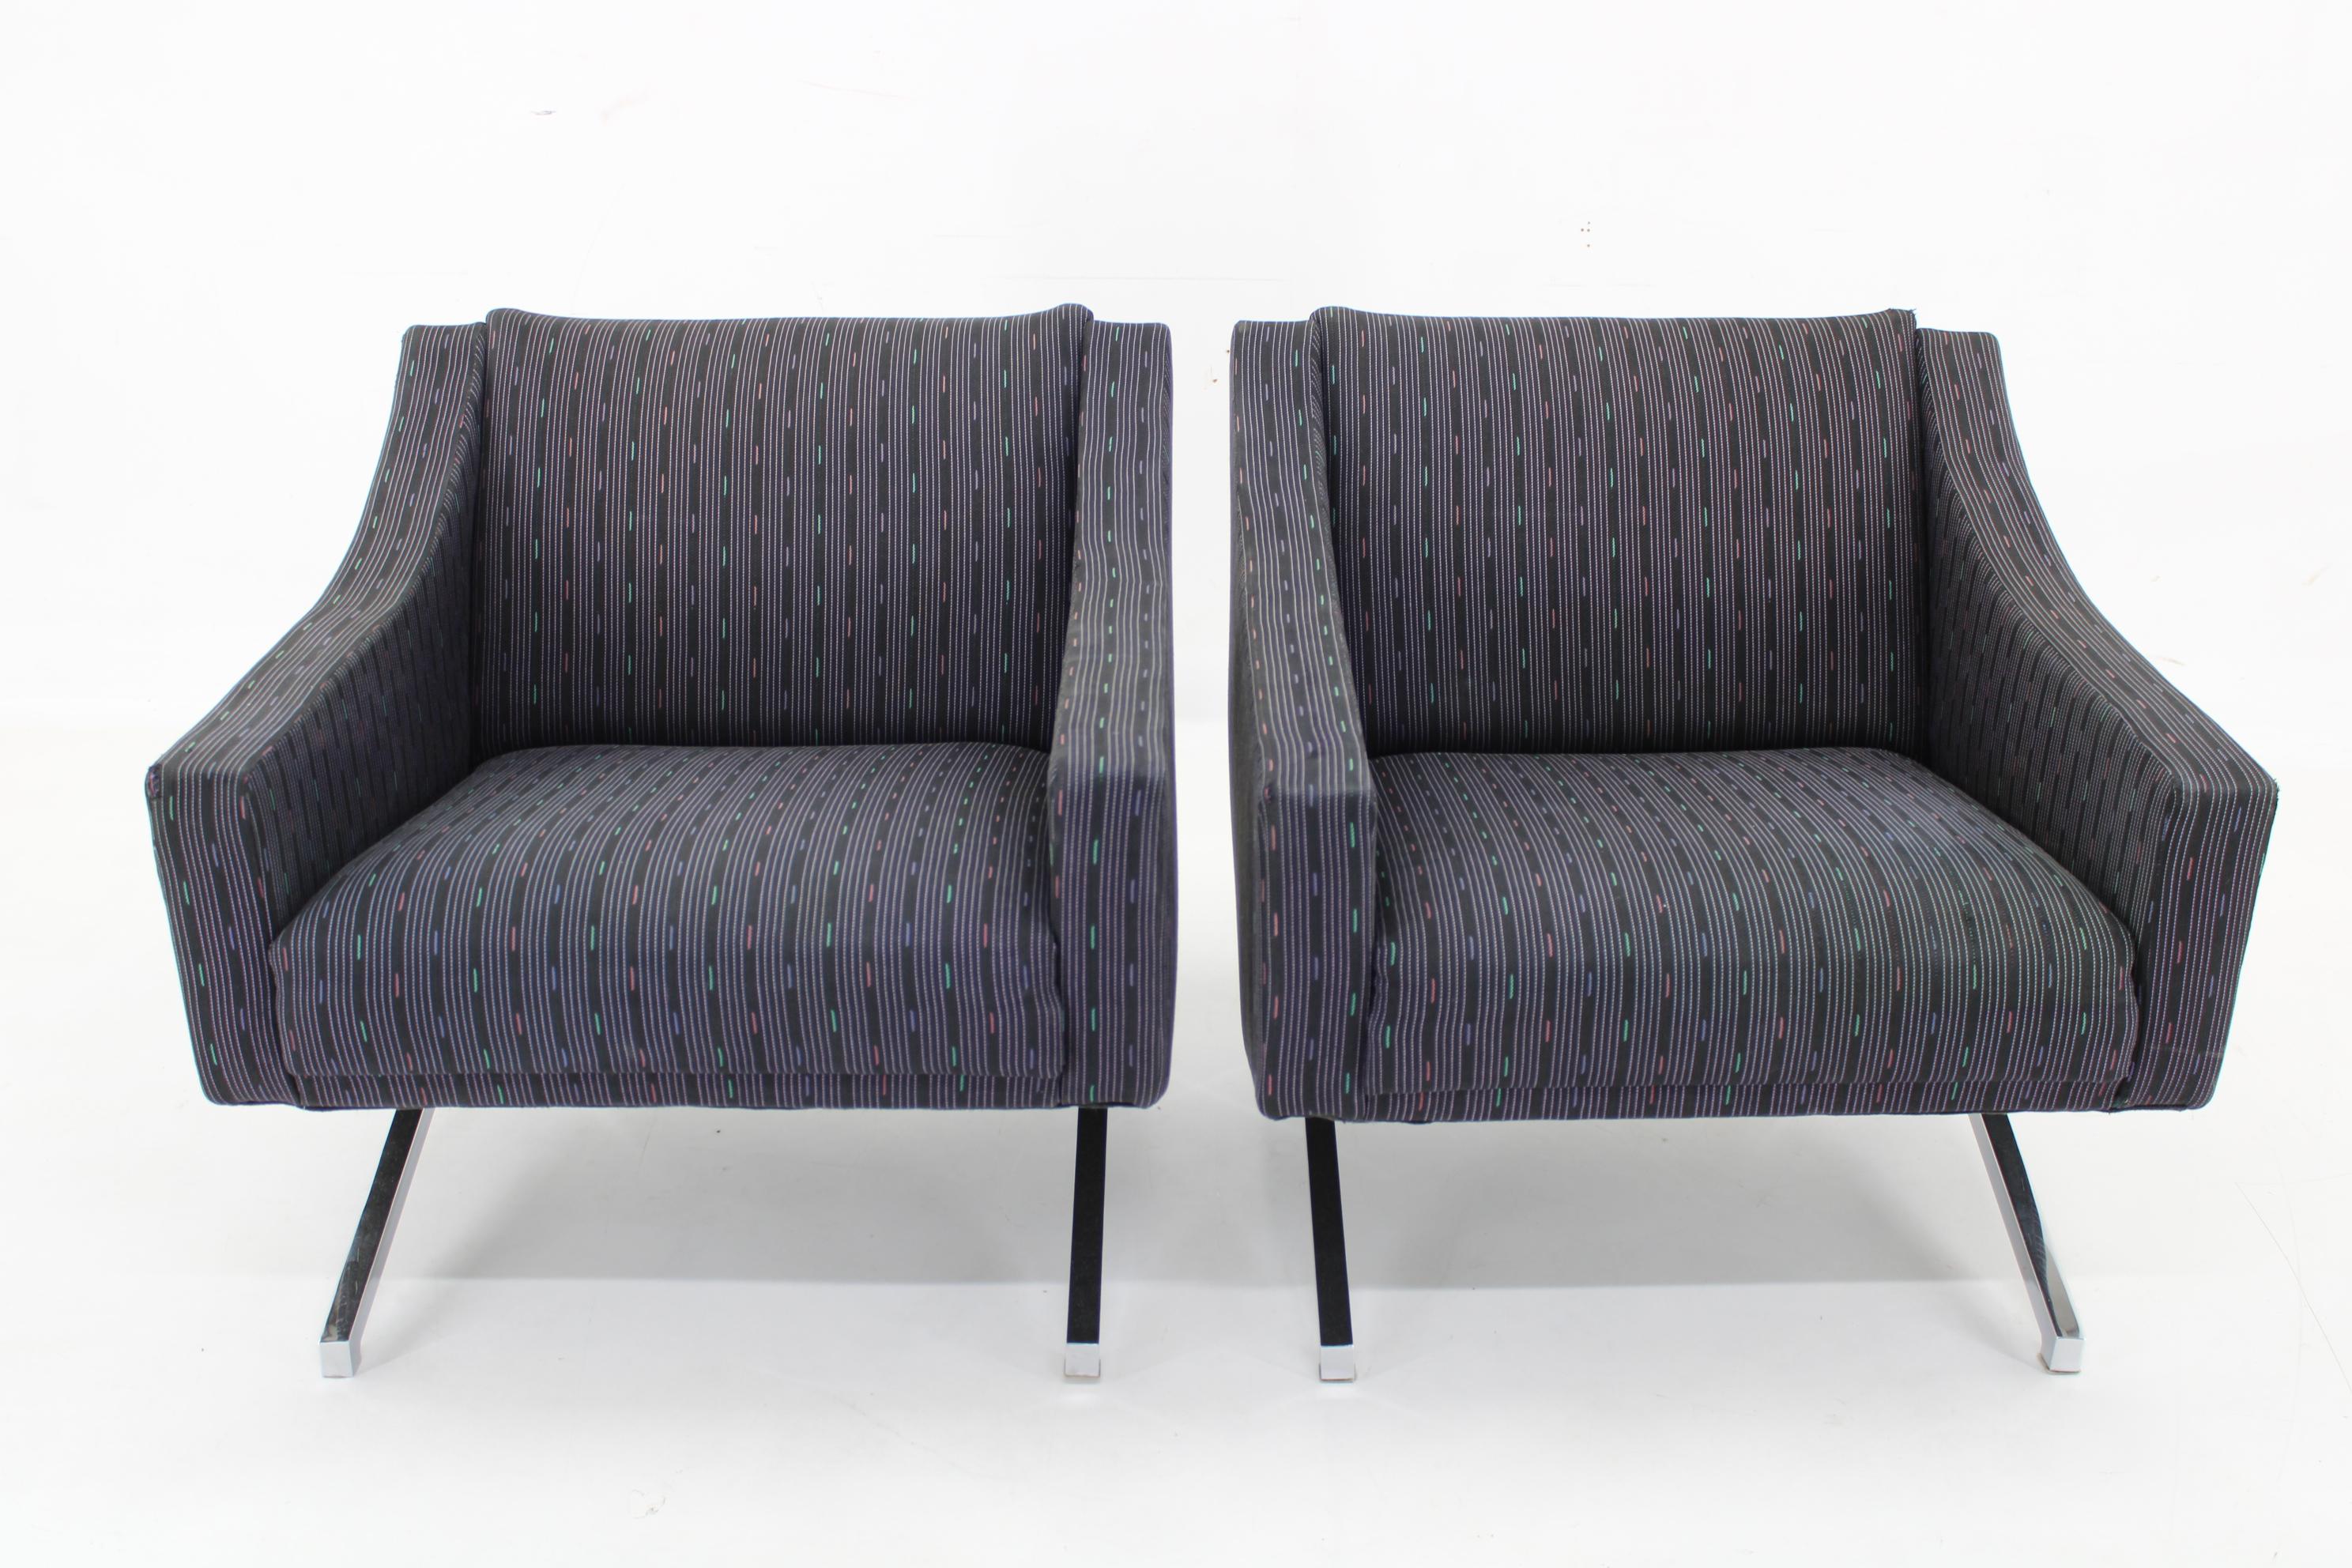  - original upholstery in good condition with some signs of use
 - Chrome plated legs in good original conditions 